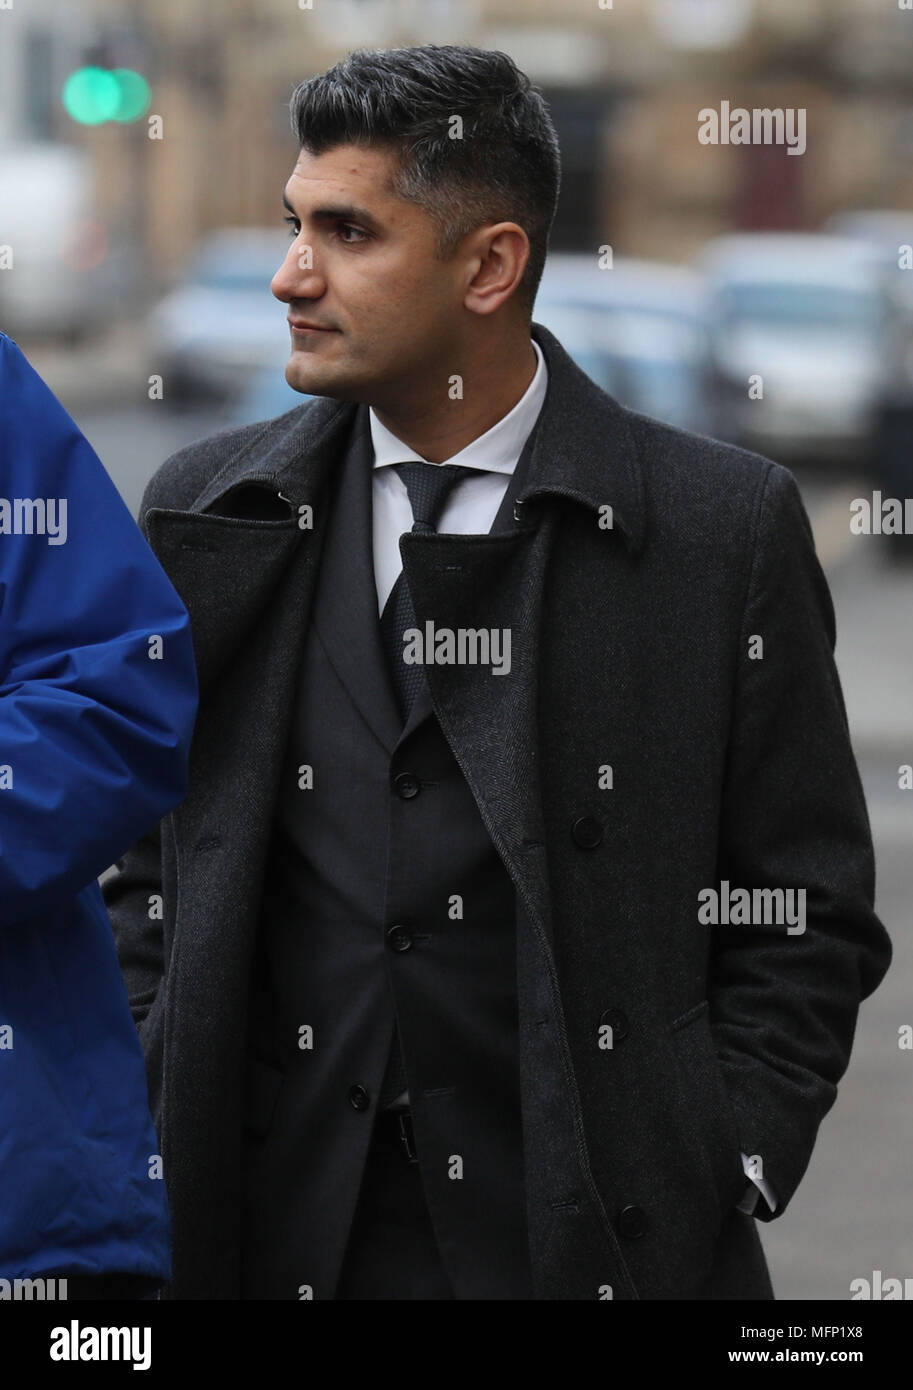 Canadian pilot Imran Zafar Syed at Paisley Sheriff Court, who along with Jean-Francois Perreault had been accused of being over the legal alcohol limit as they prepared to fly an Air Transat passenger jet from Glasgow to Toronto. Both men have been cleared after key evidence was destroyed by prison staff. 23/03/2017 Stock Photo